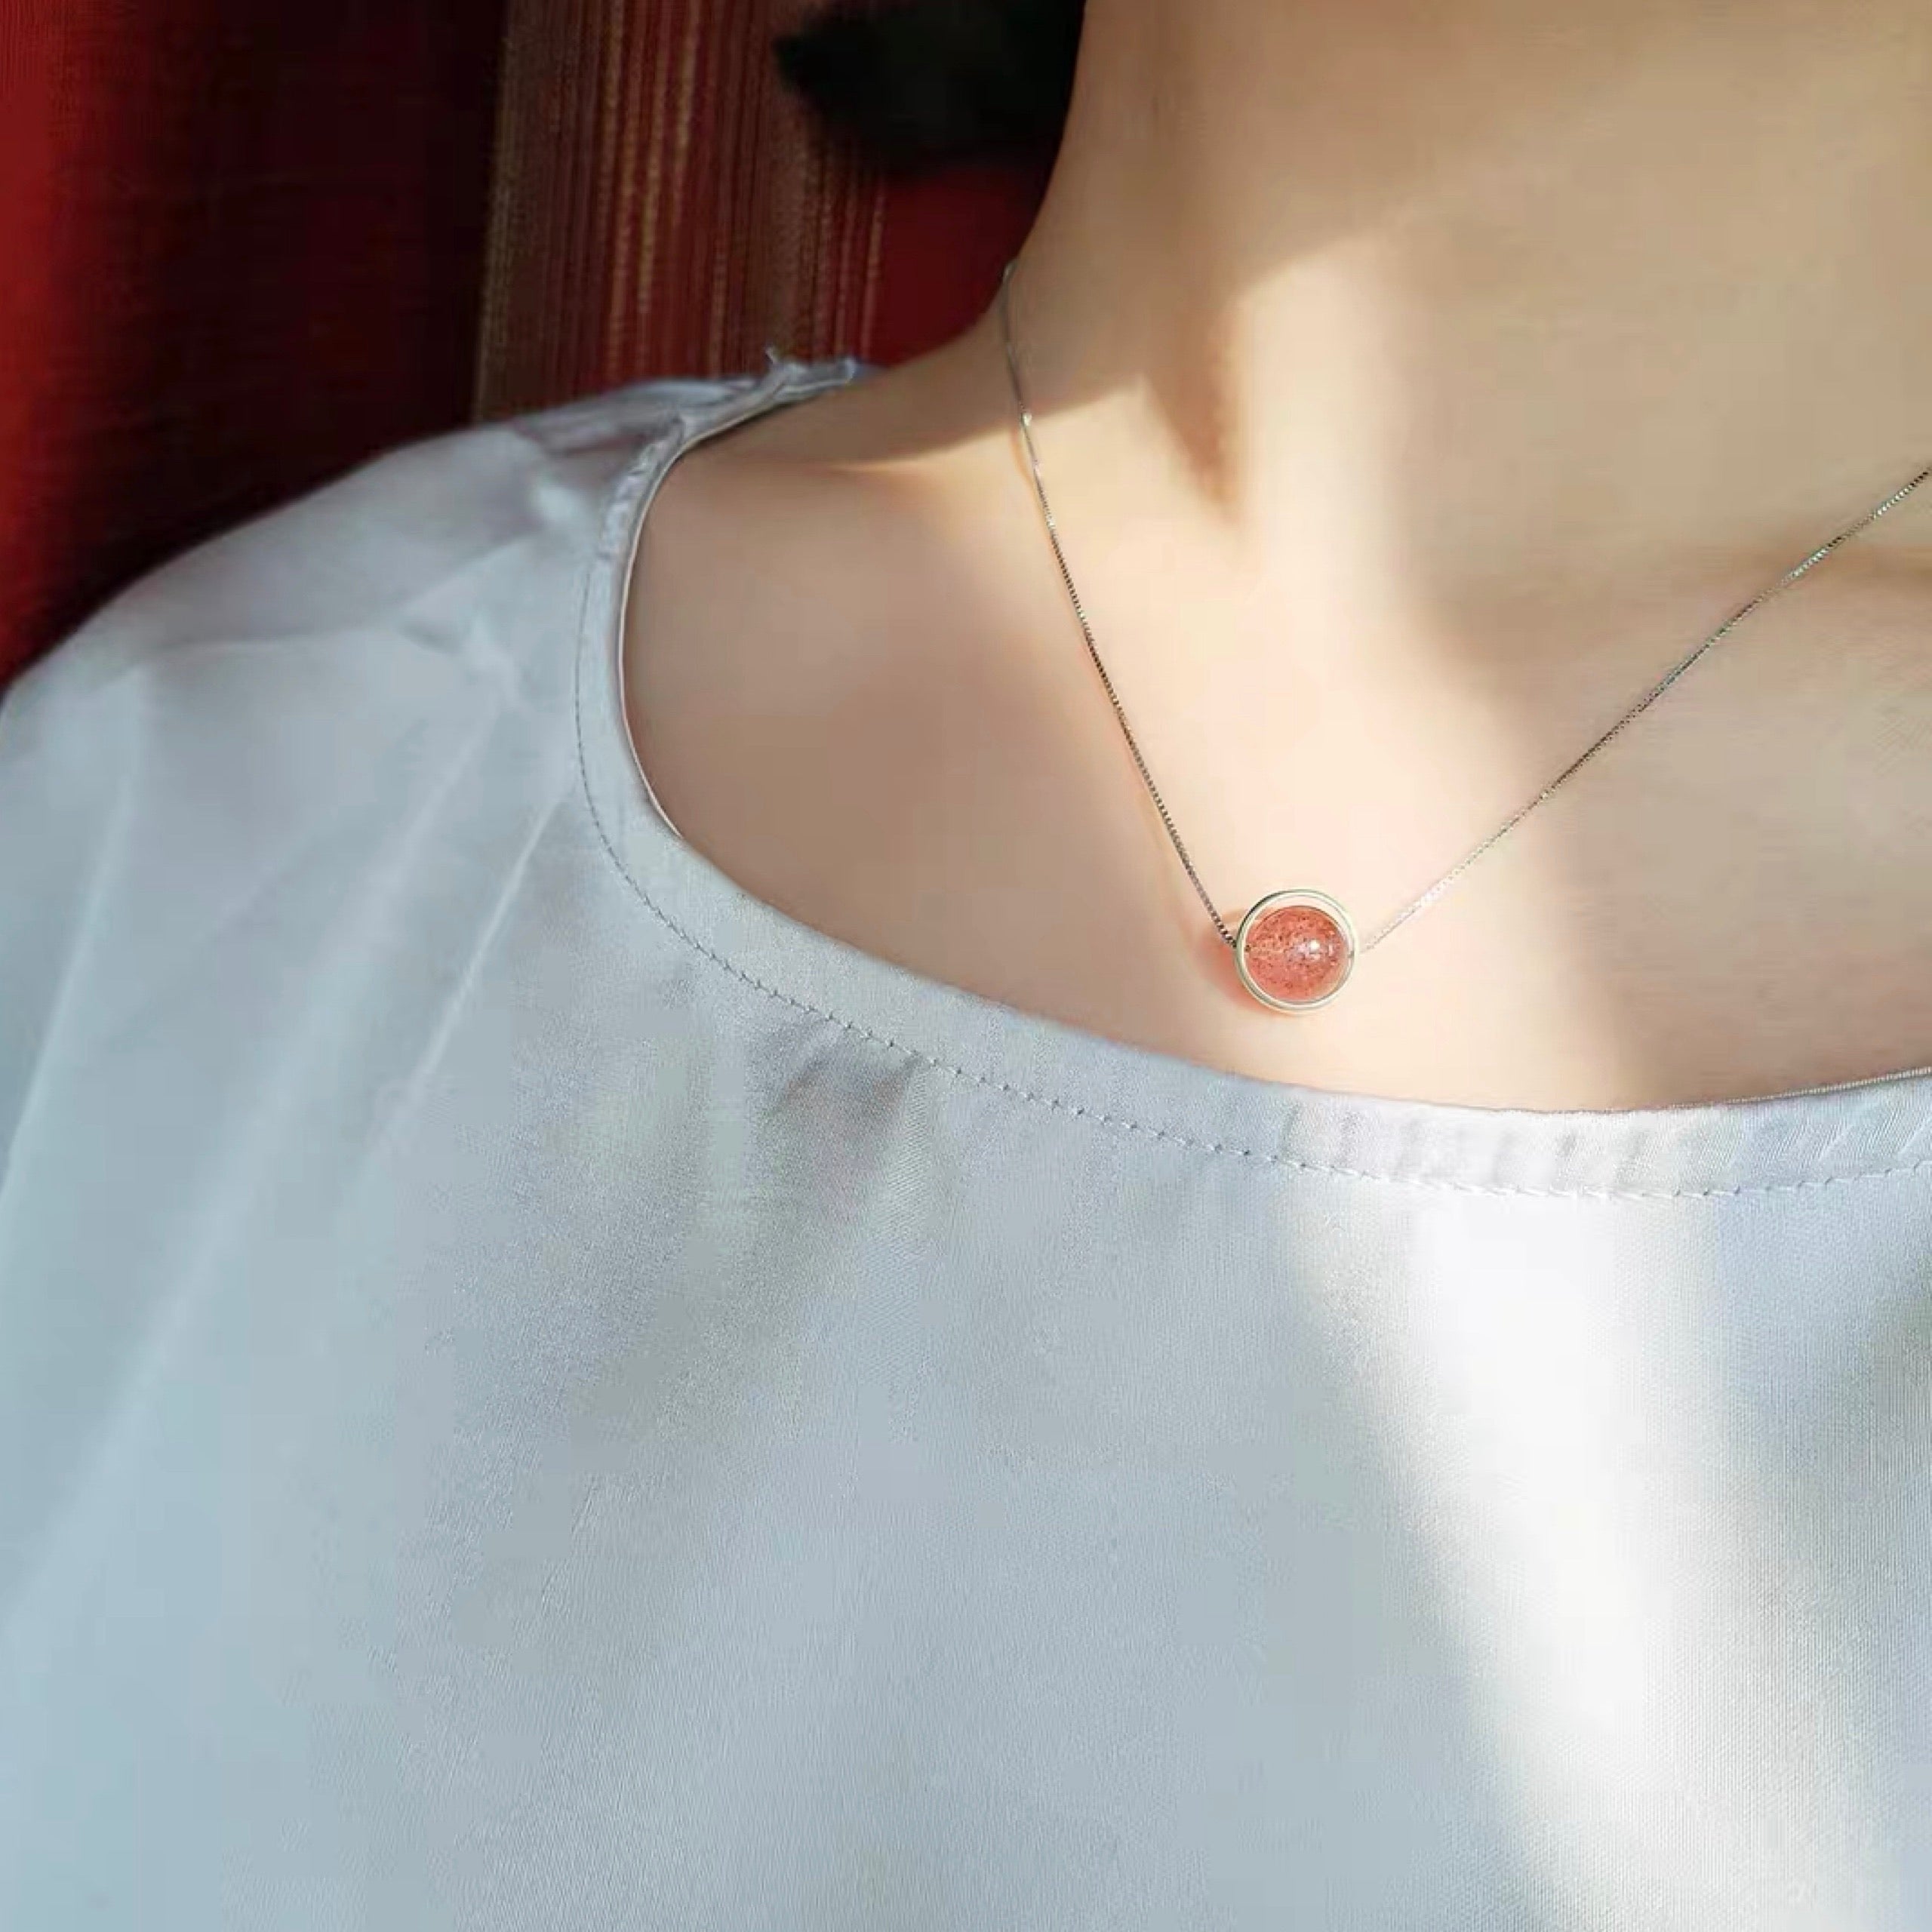 Necklace: Classic A